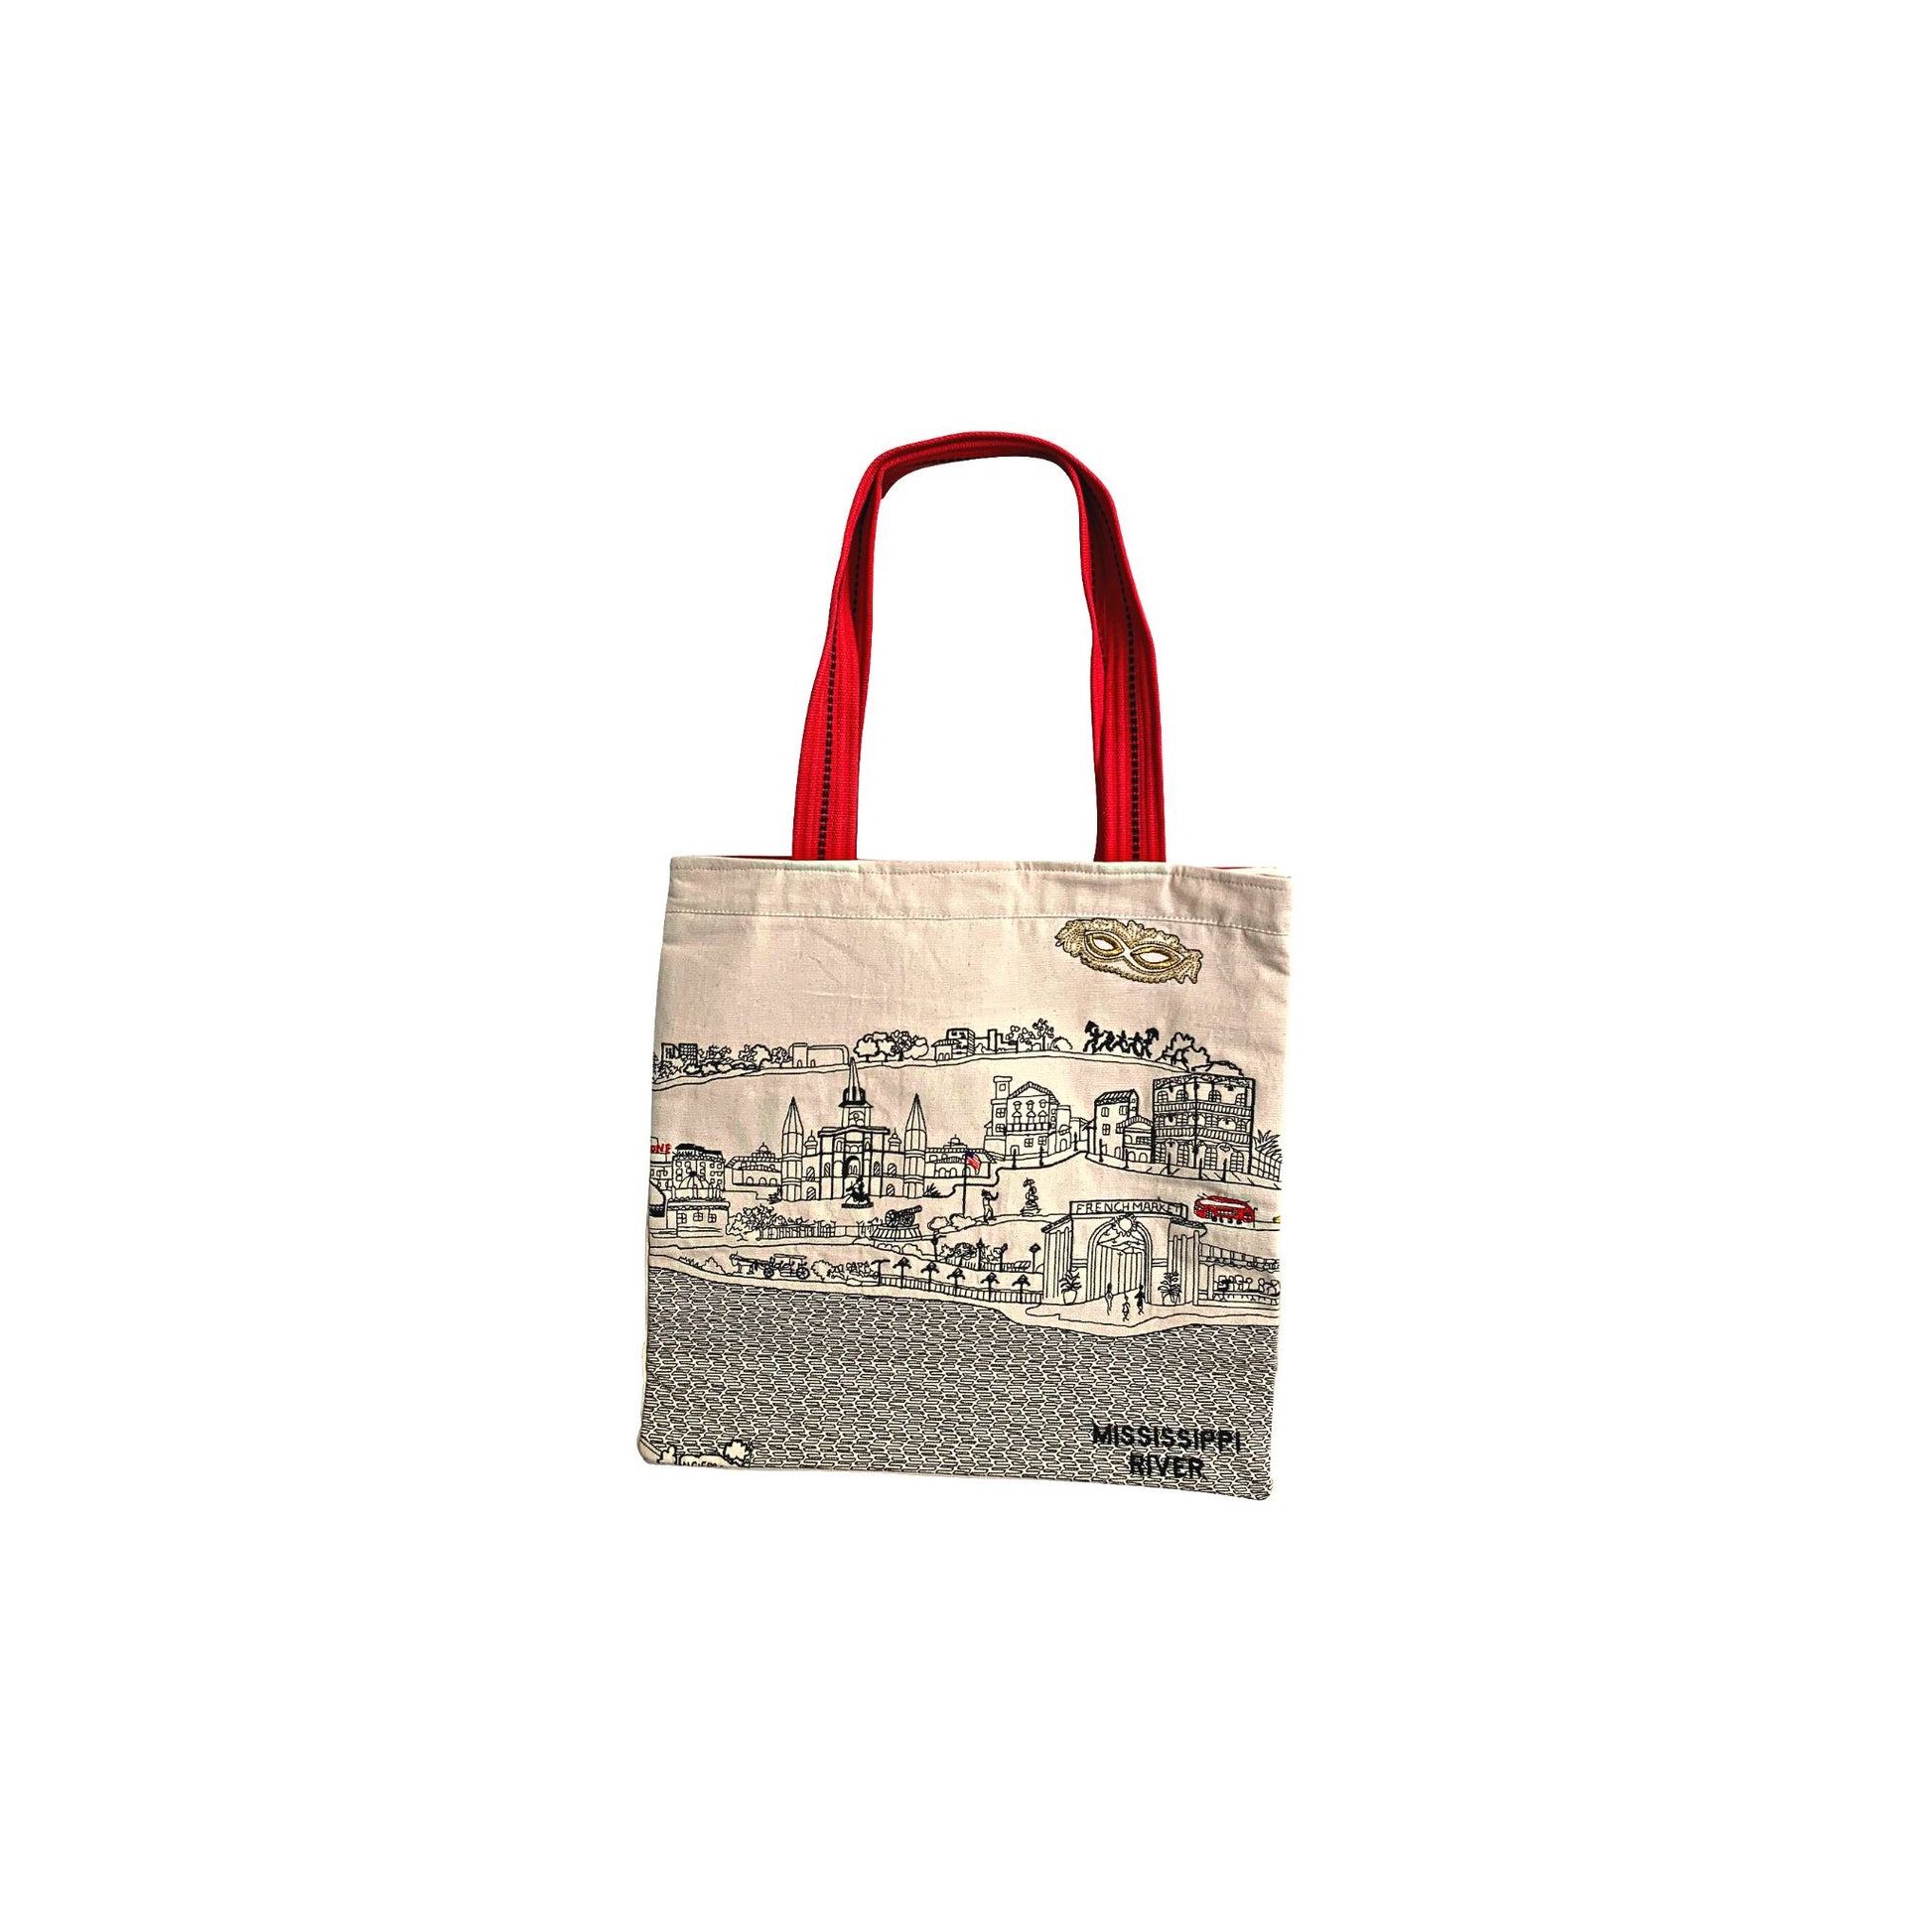 New Orleans Day Tote